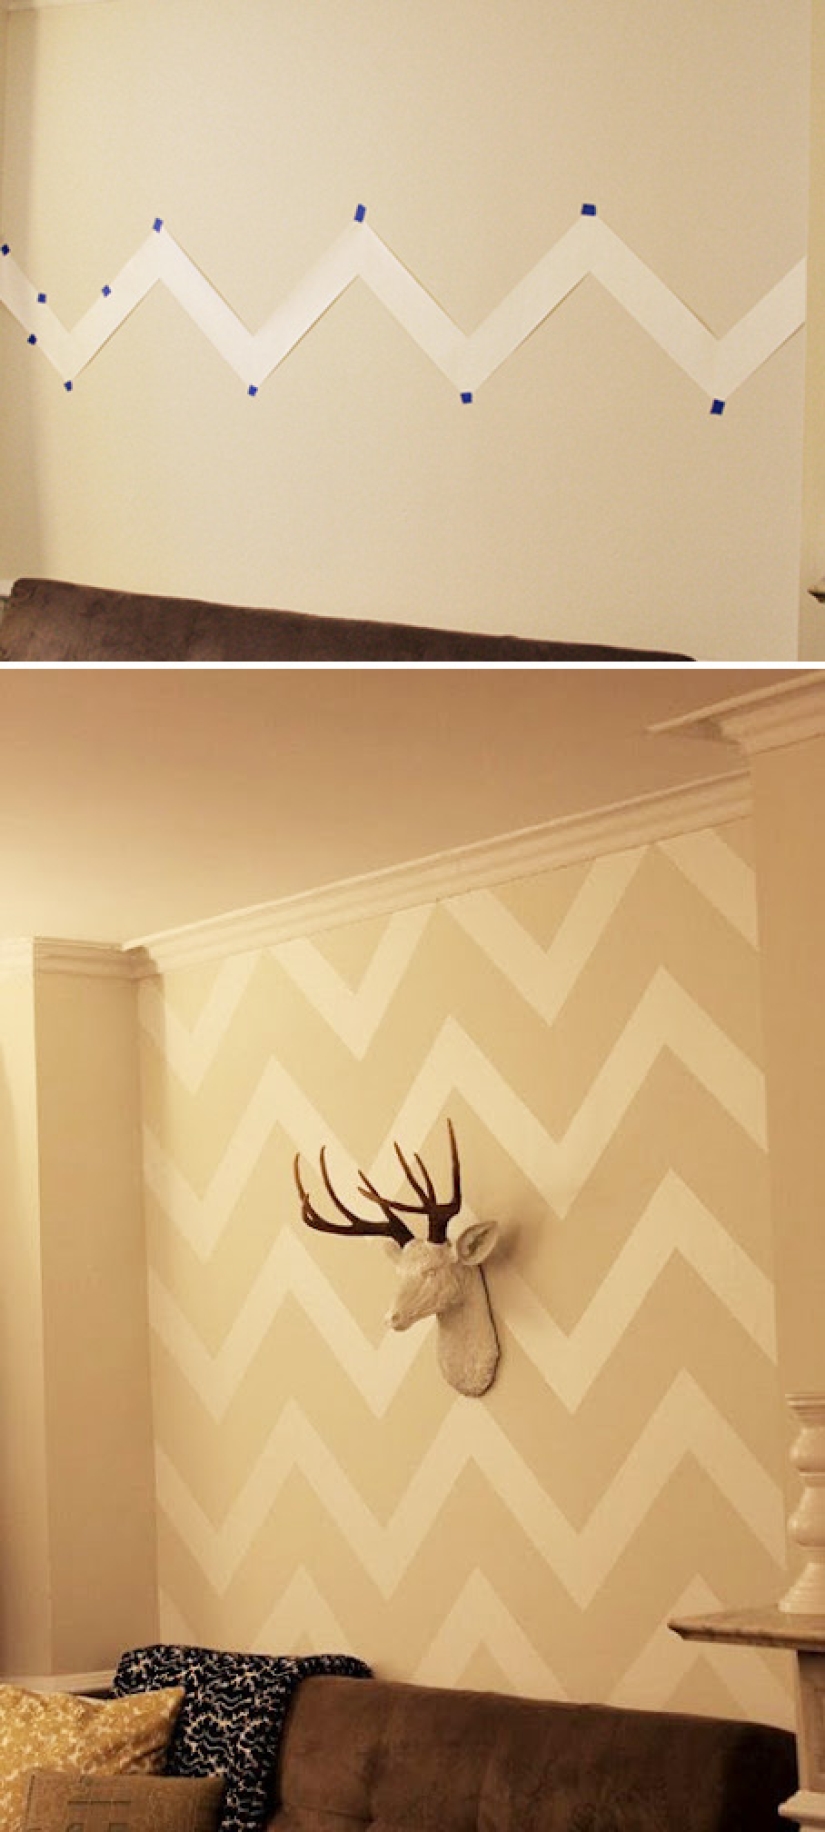 How to update things with self-adhesive tape